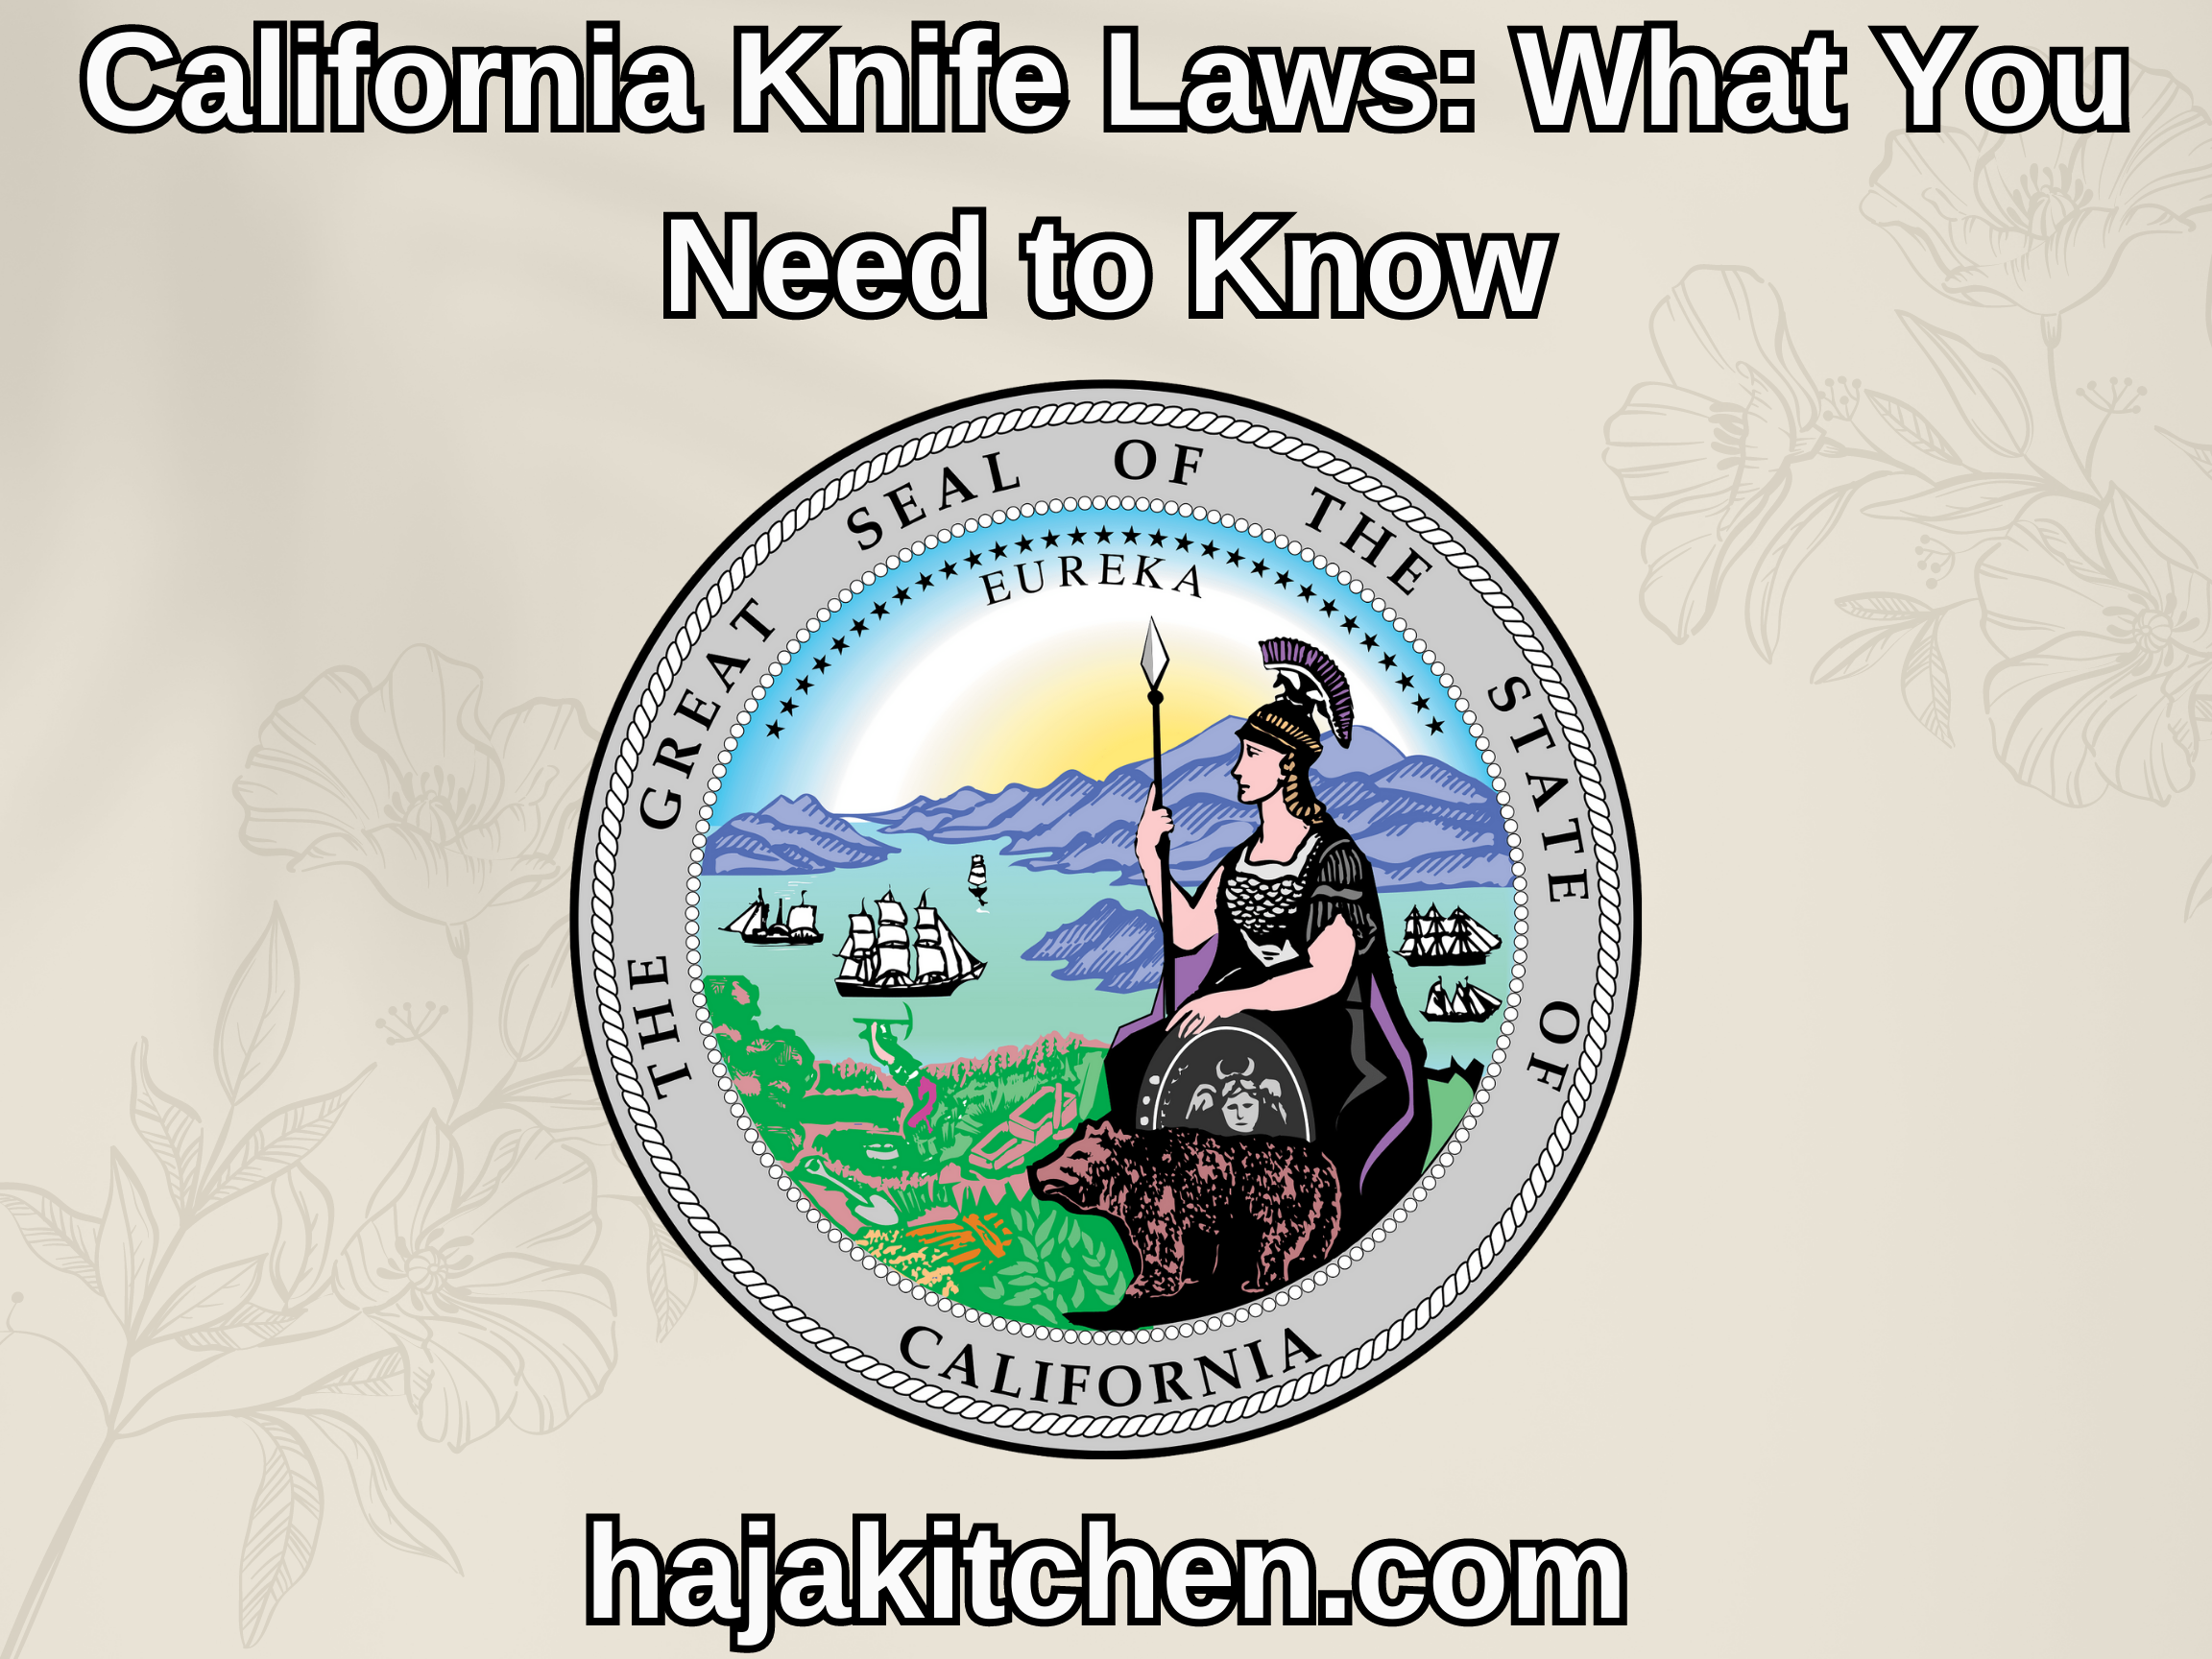 California Knife Laws: What You Need to Know - california